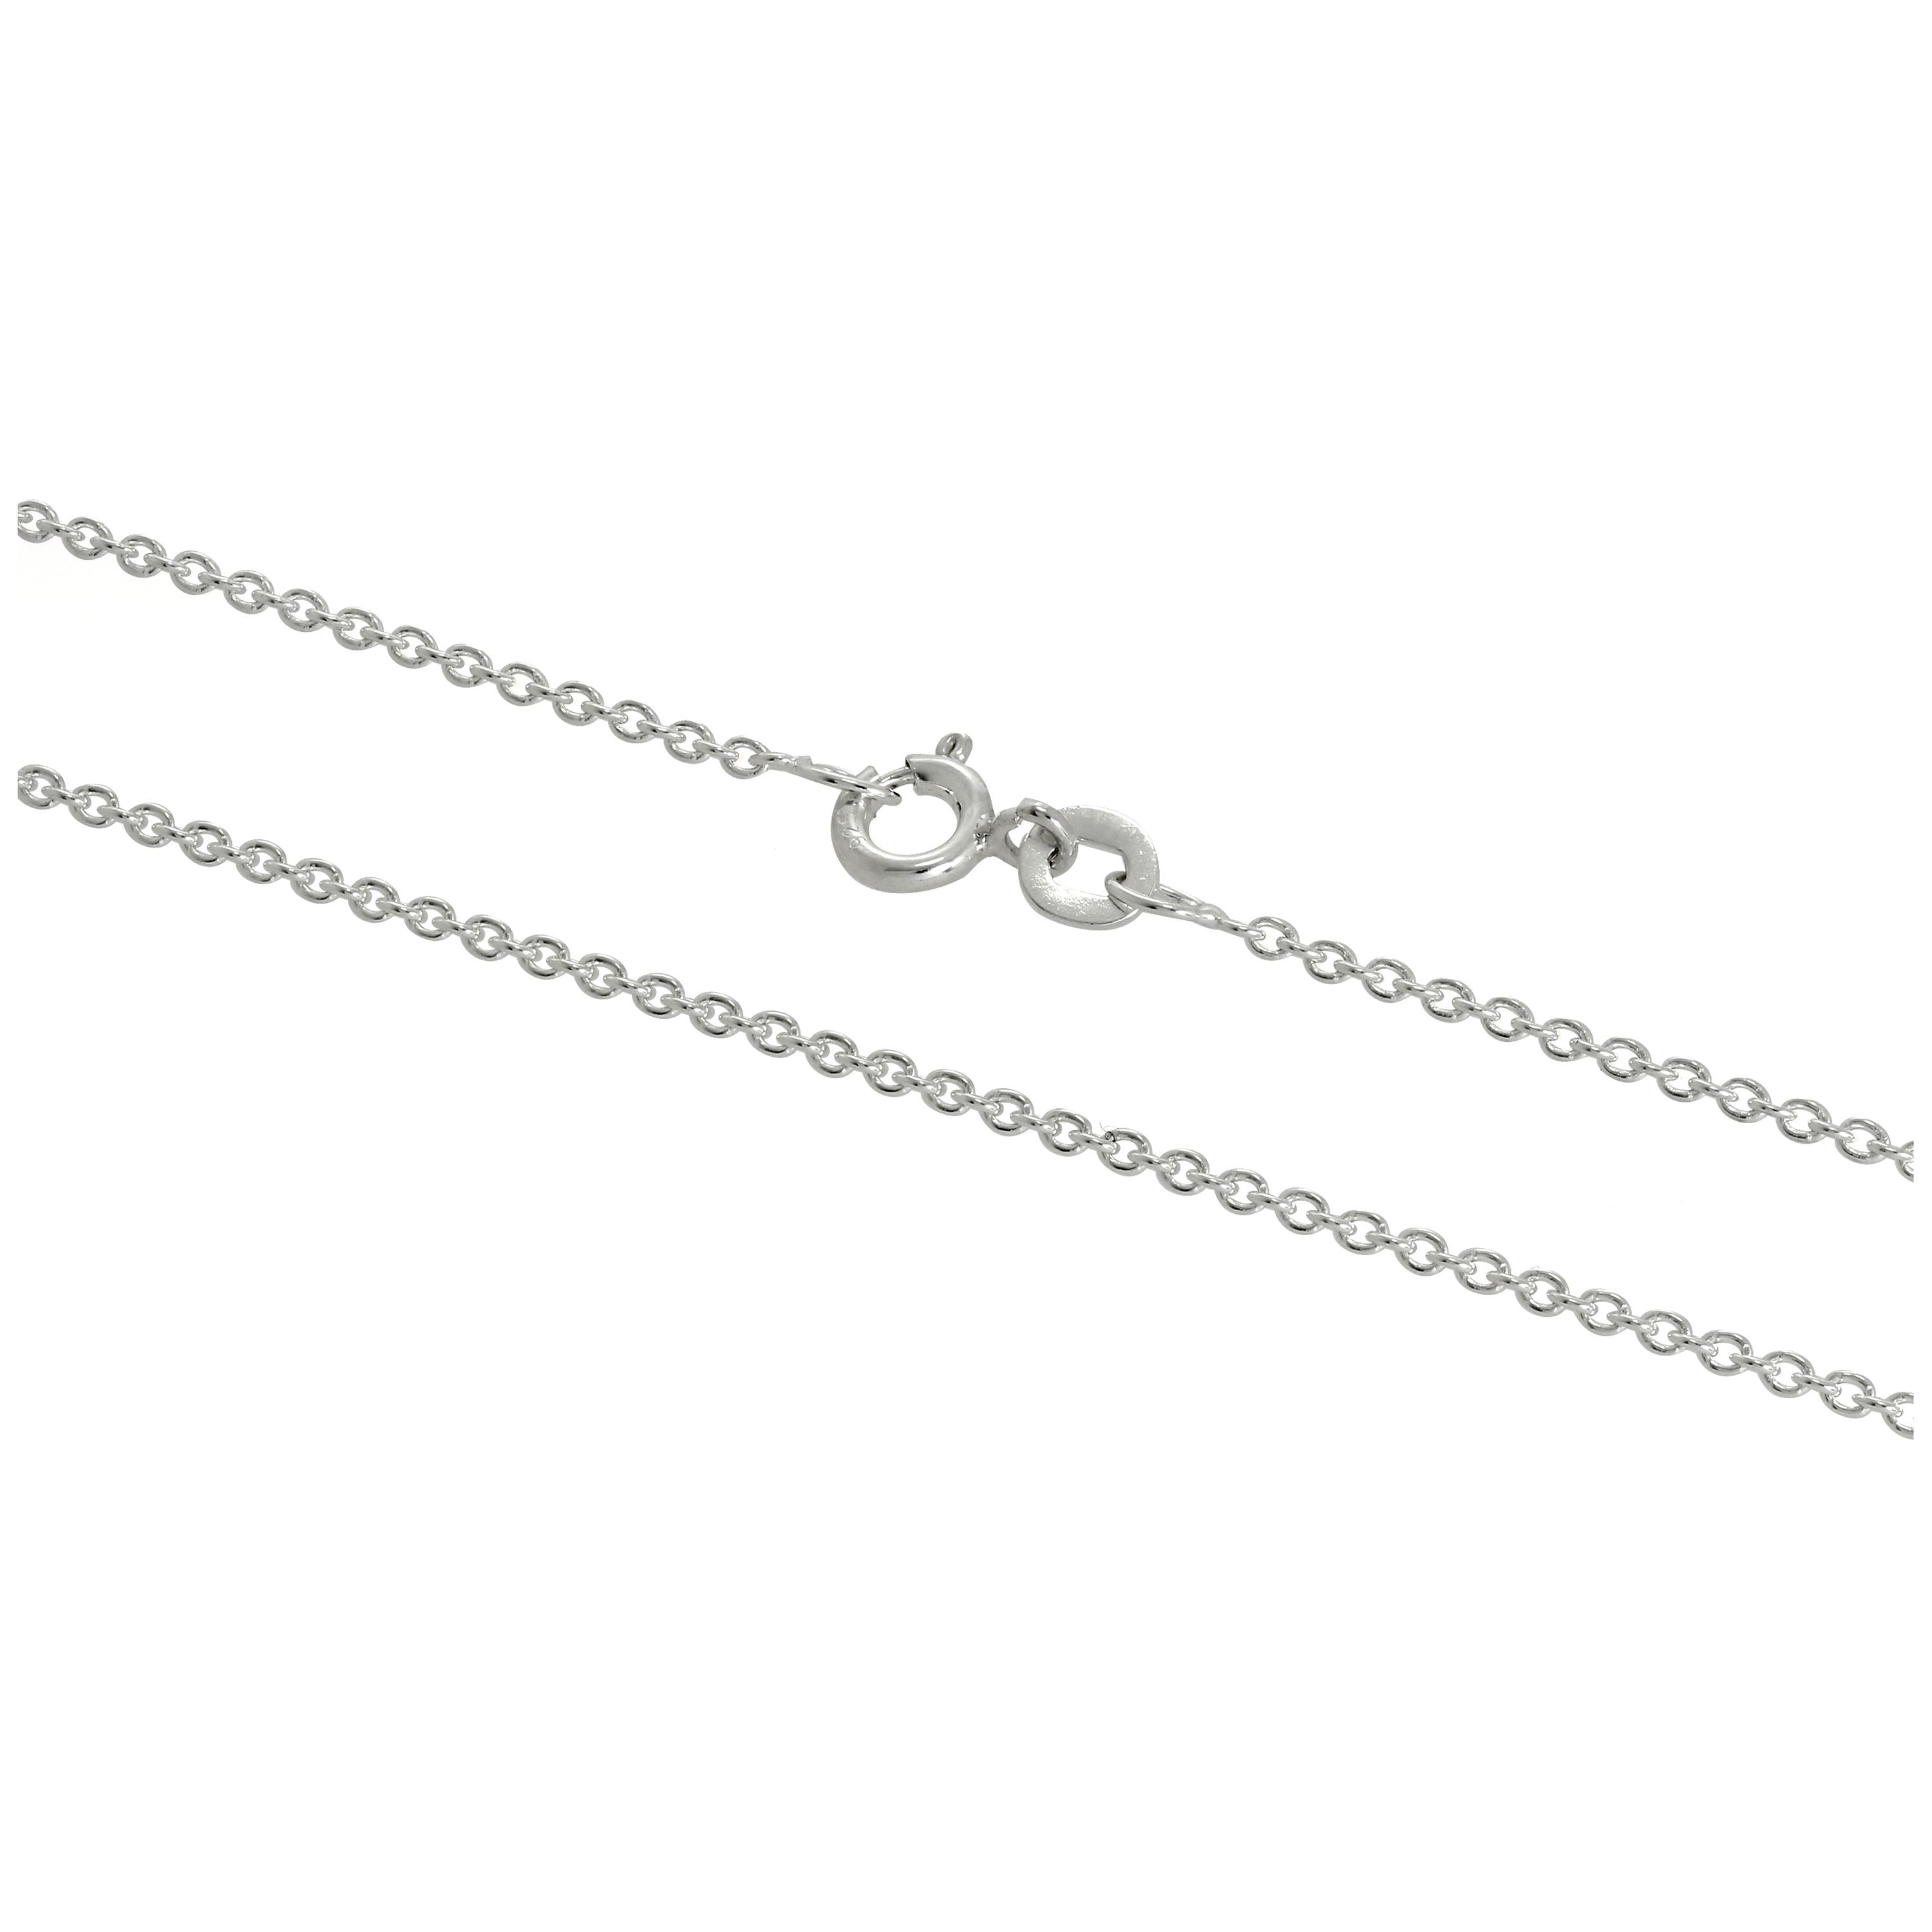 Details About Real 925 Sterling Silver 1mm Cable Chain 16 – 24 Inches  Chains Necklaces In Recent Cable Chain Necklaces (View 3 of 25)